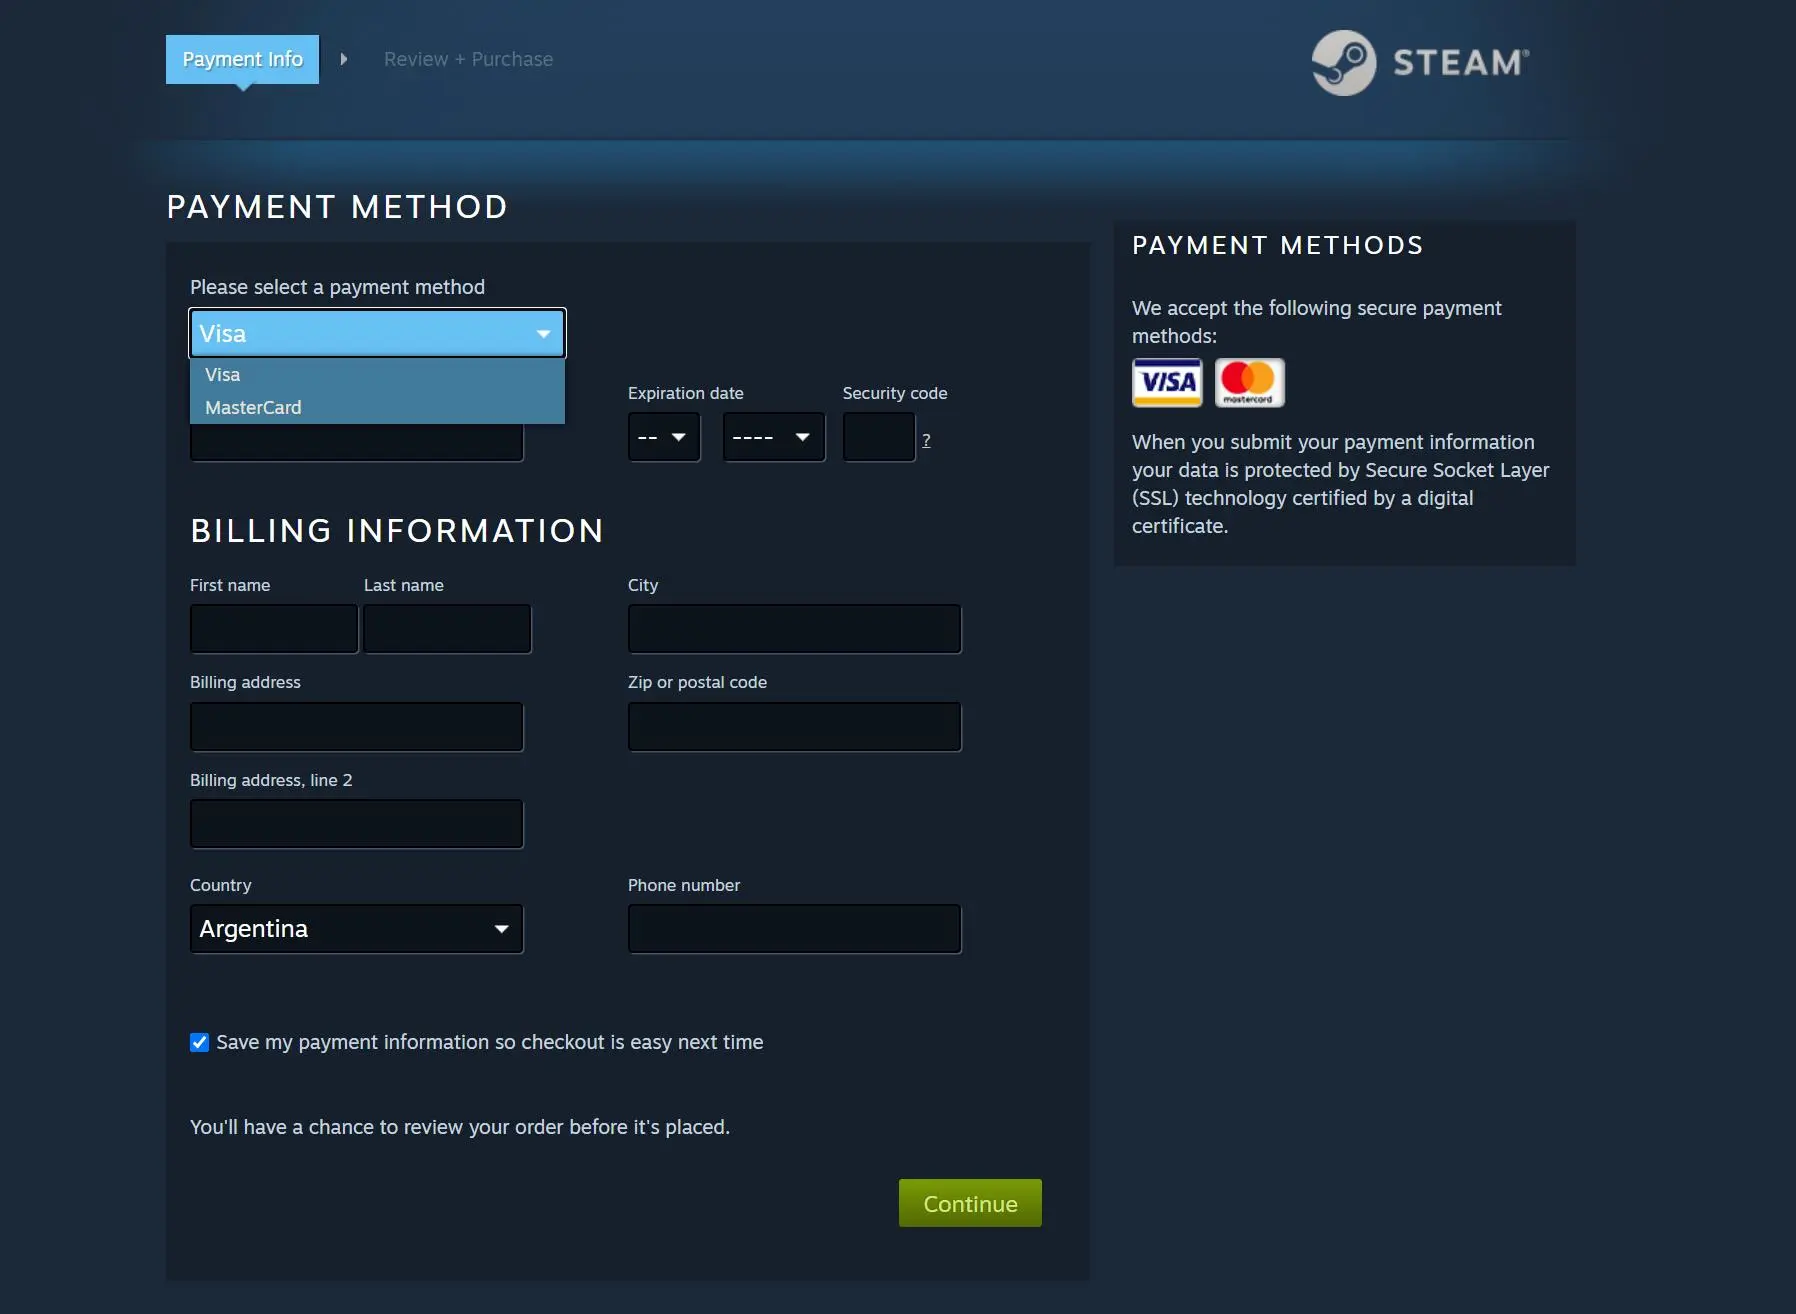 Save Money by Purchasing Games from Steam Argentina Region! A Complete  Tutorial